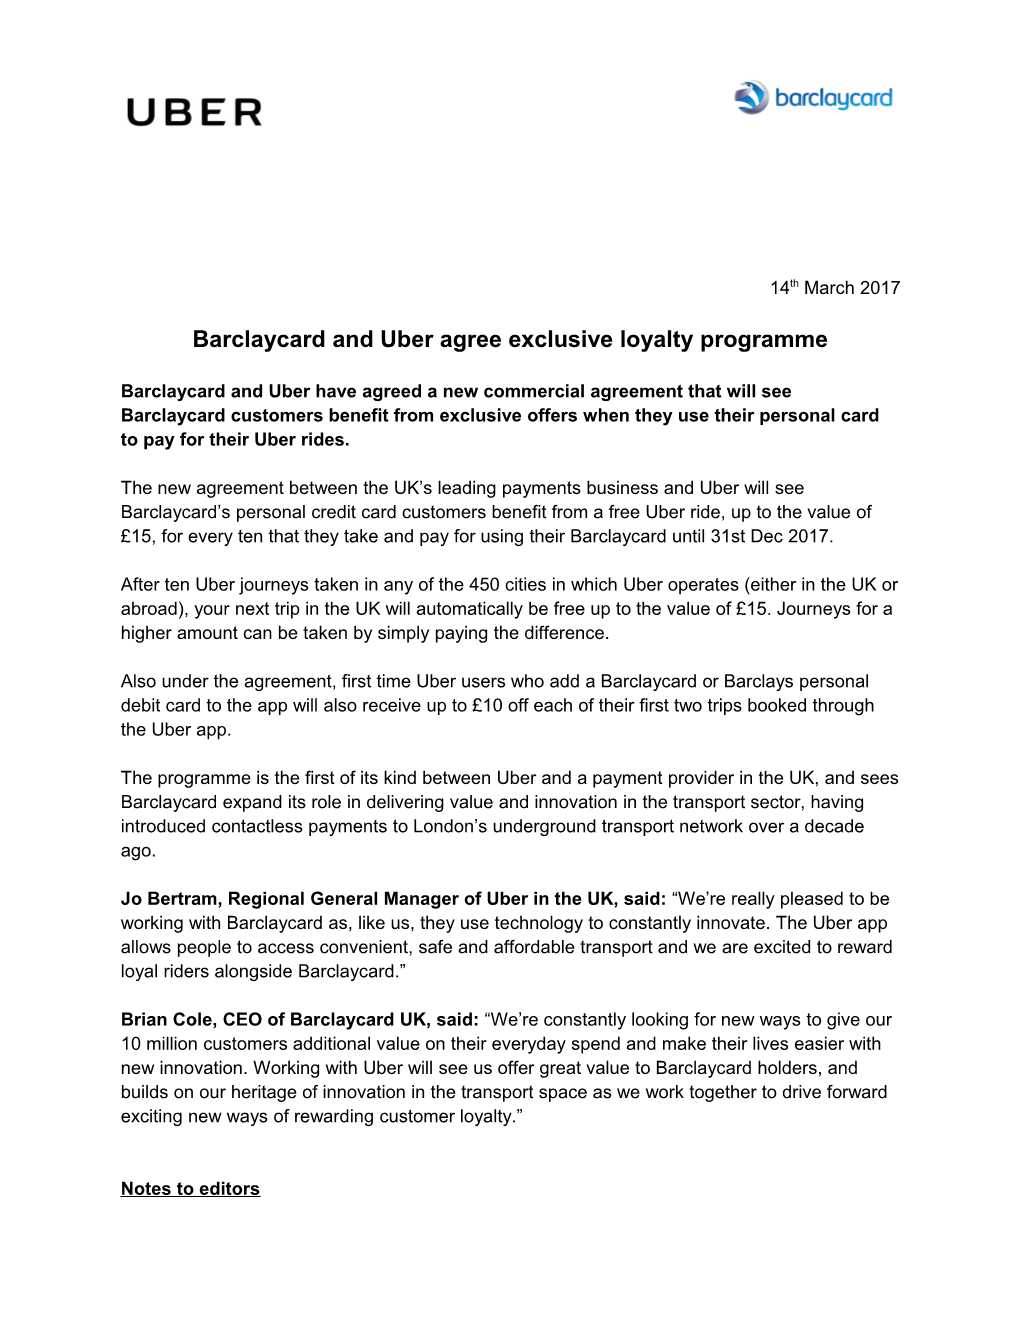 Barclaycard and Uber Agree Exclusive Loyalty Programme